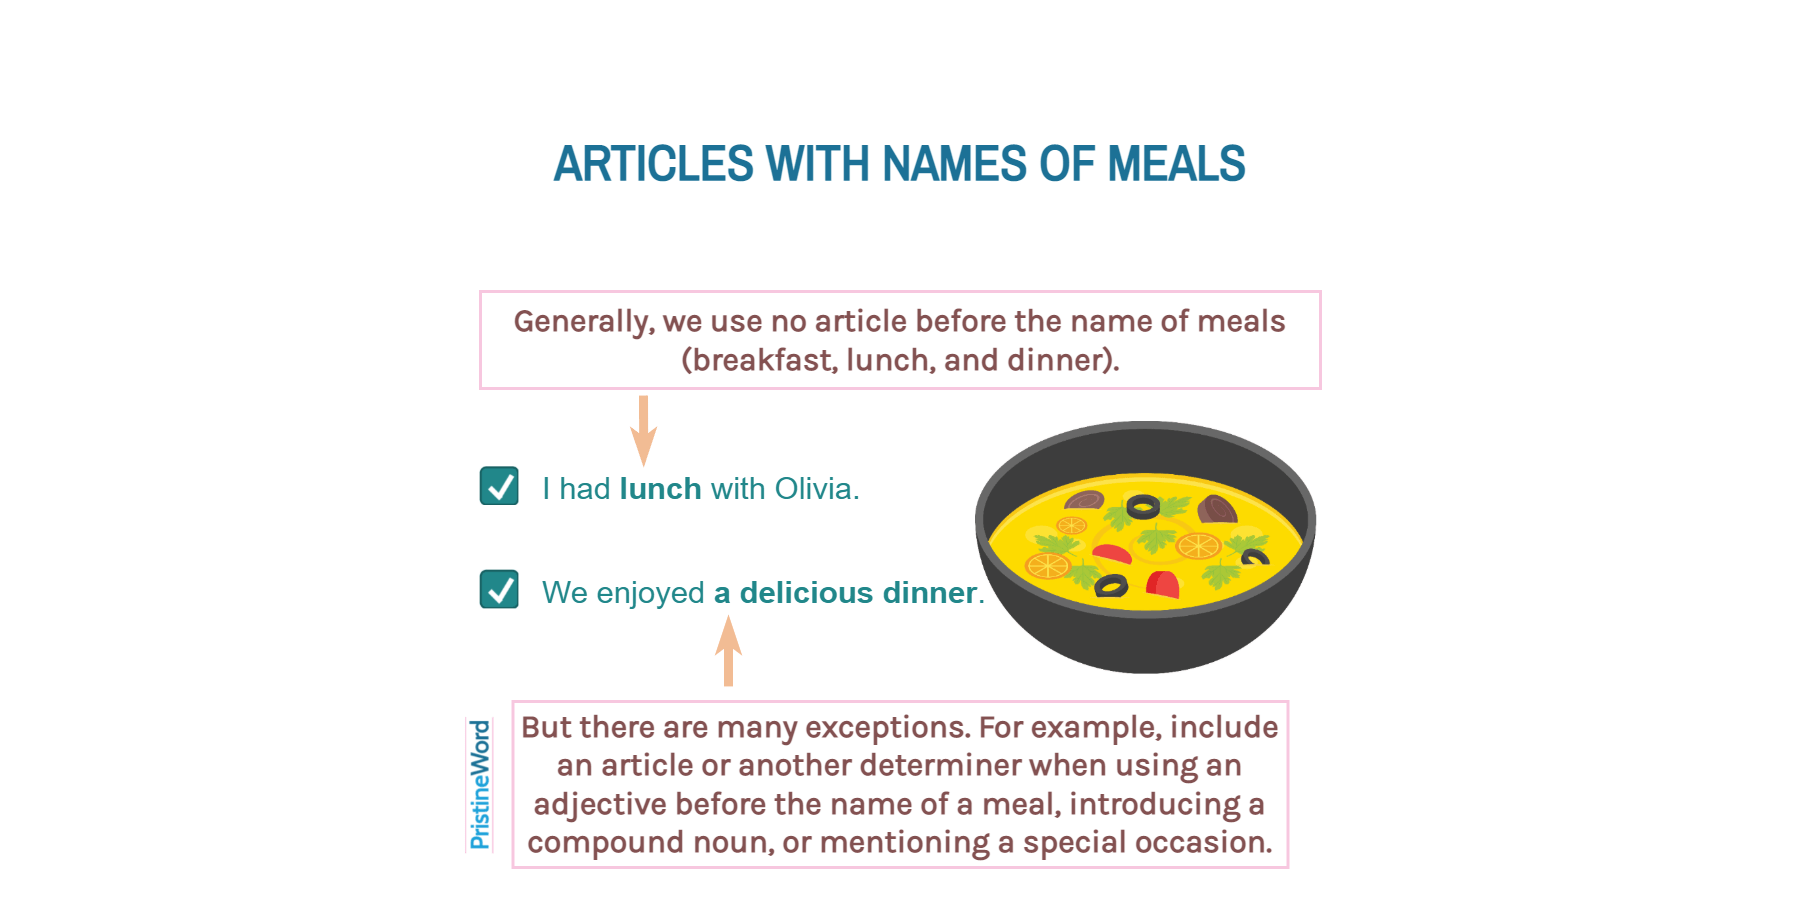 Articles With Names of Meals